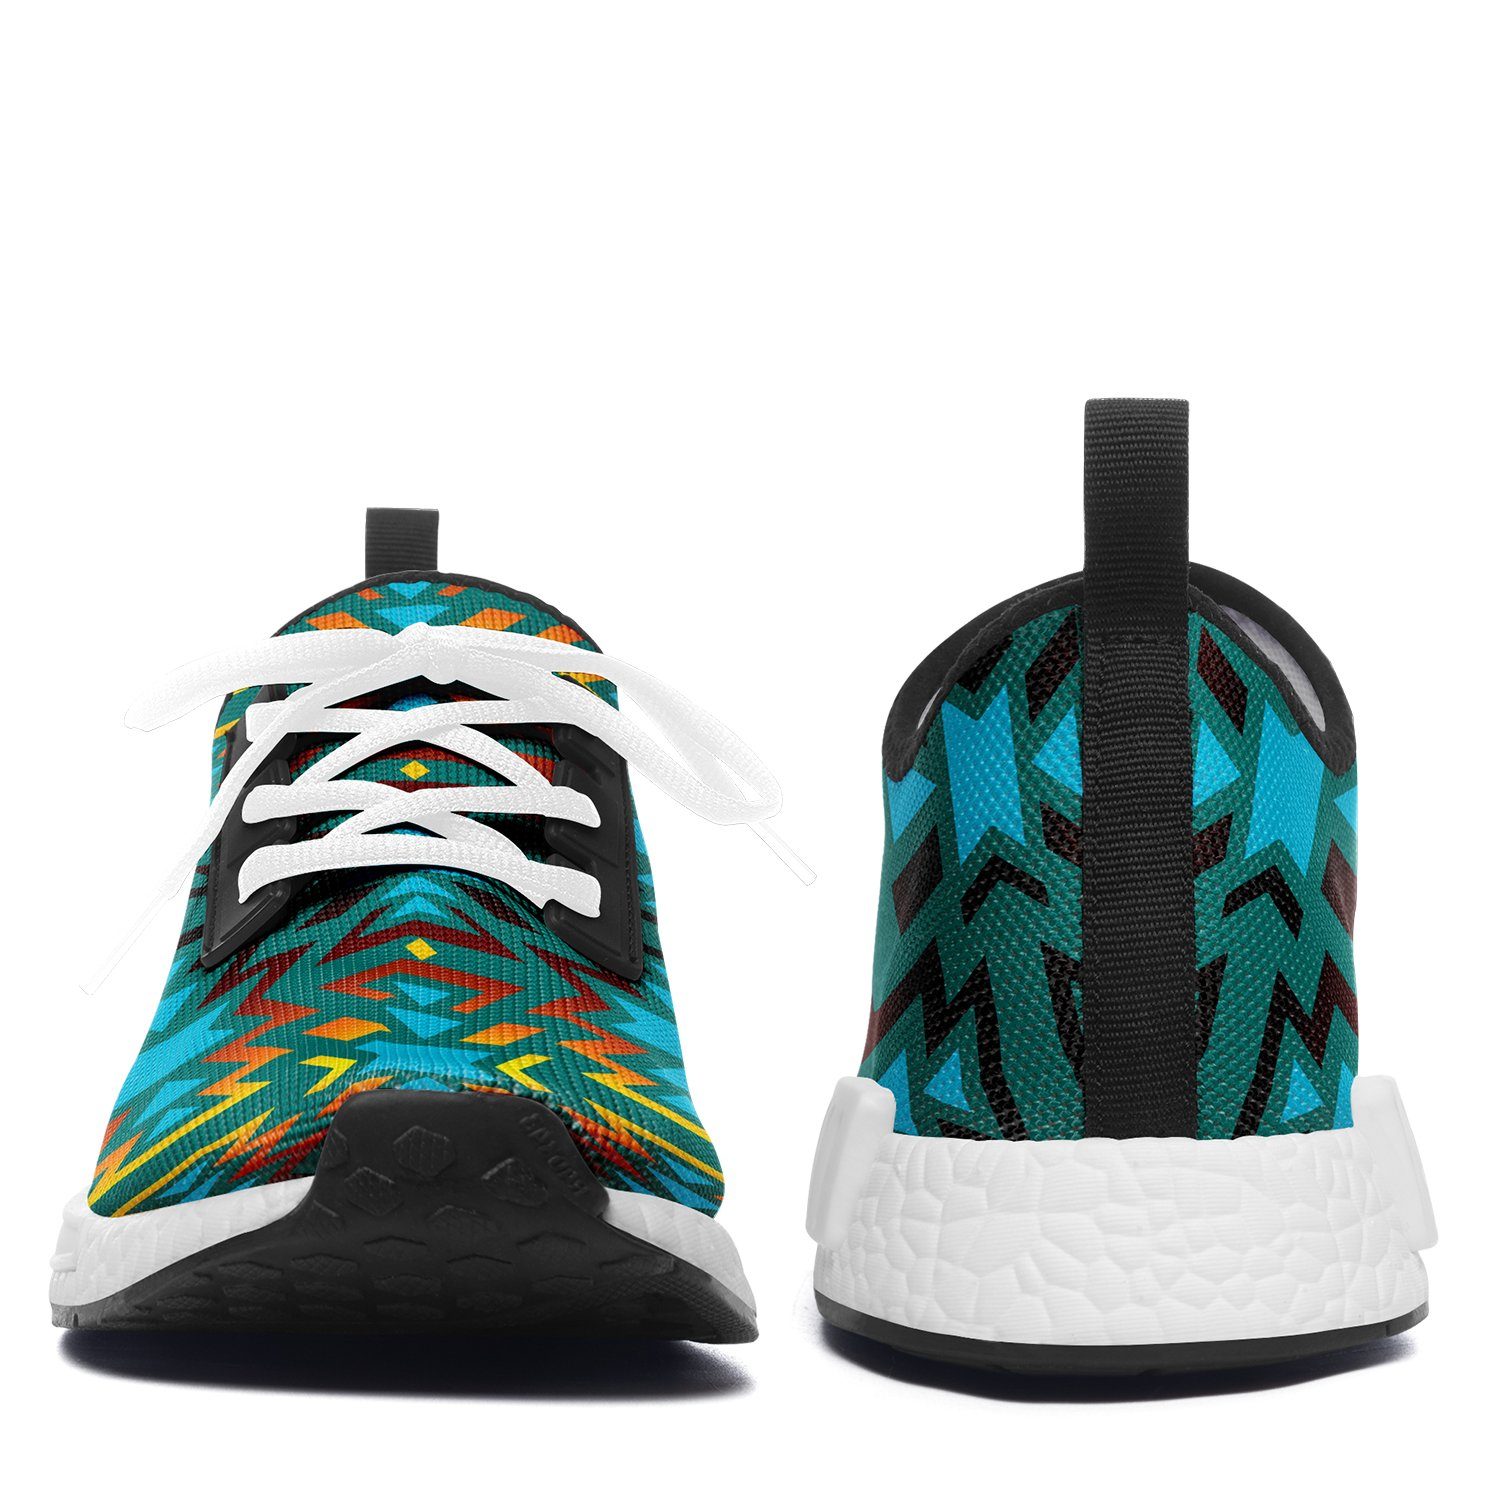 Fire Colors and Turquoise Teal Draco Running Shoes 49 Dzine 